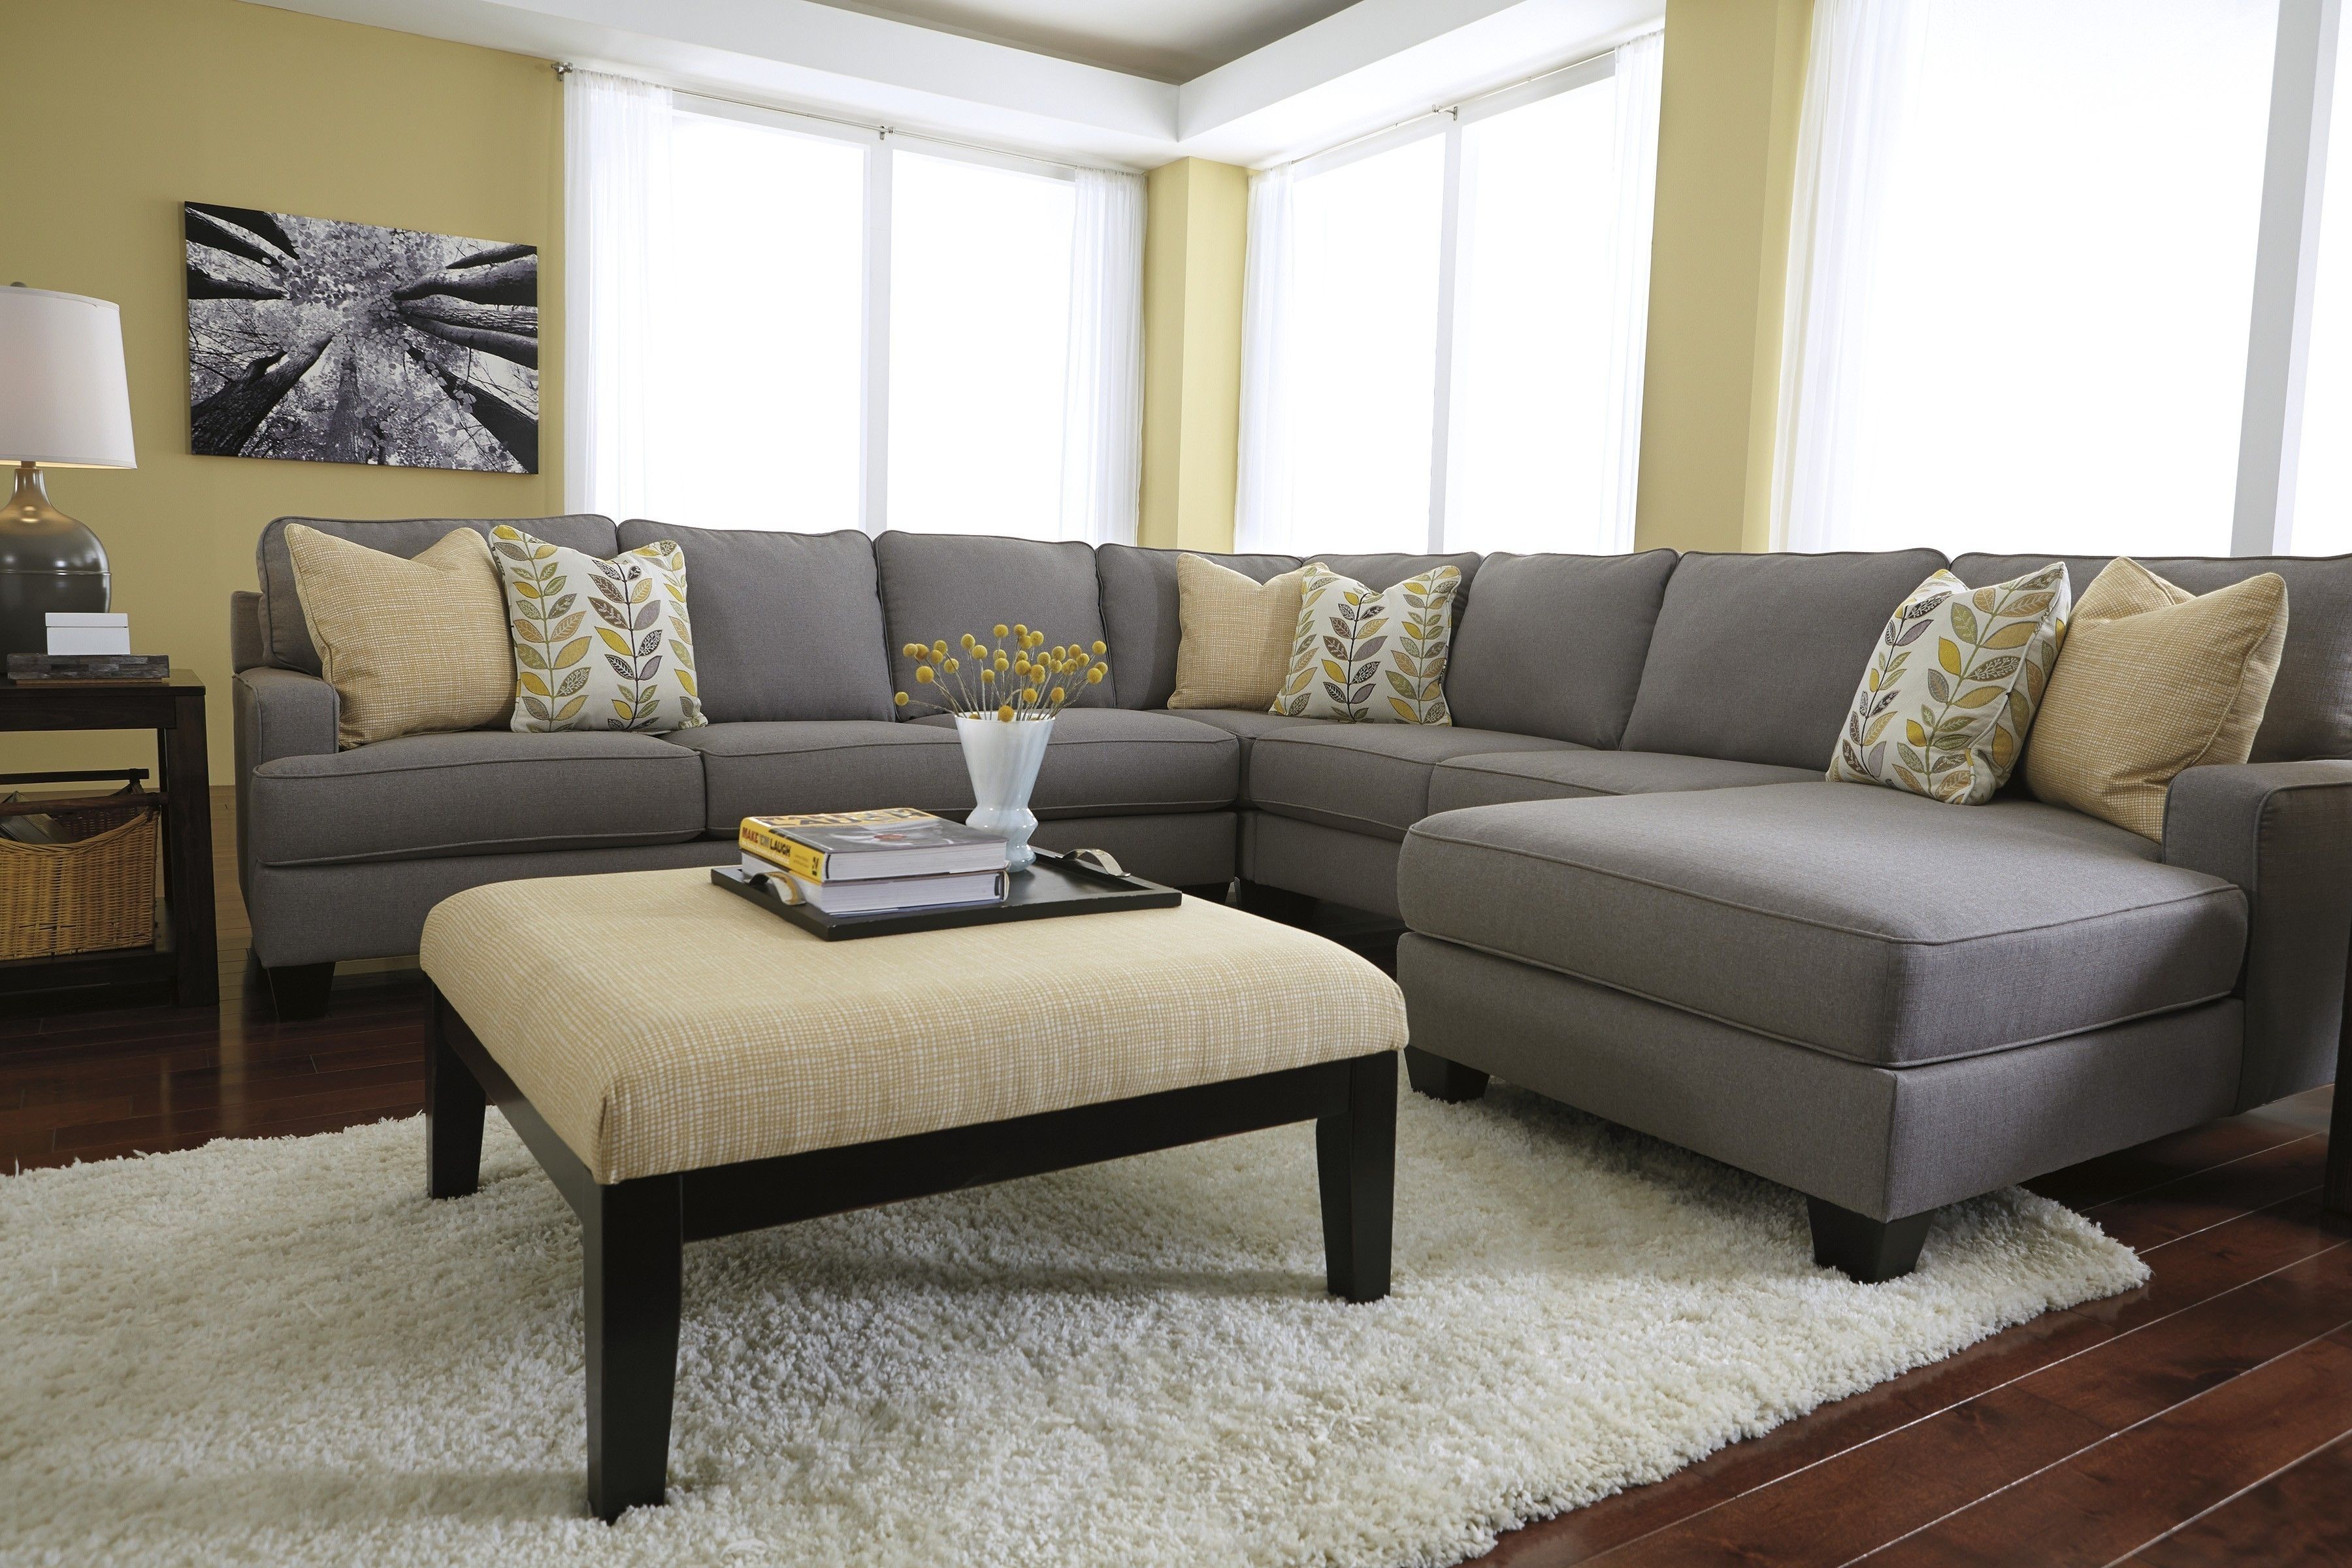 Sectional Sofa: U Shape Colorful Sectional Microfiber Sofa And For Leather Sectionals With Chaise And Ottoman (View 8 of 15)